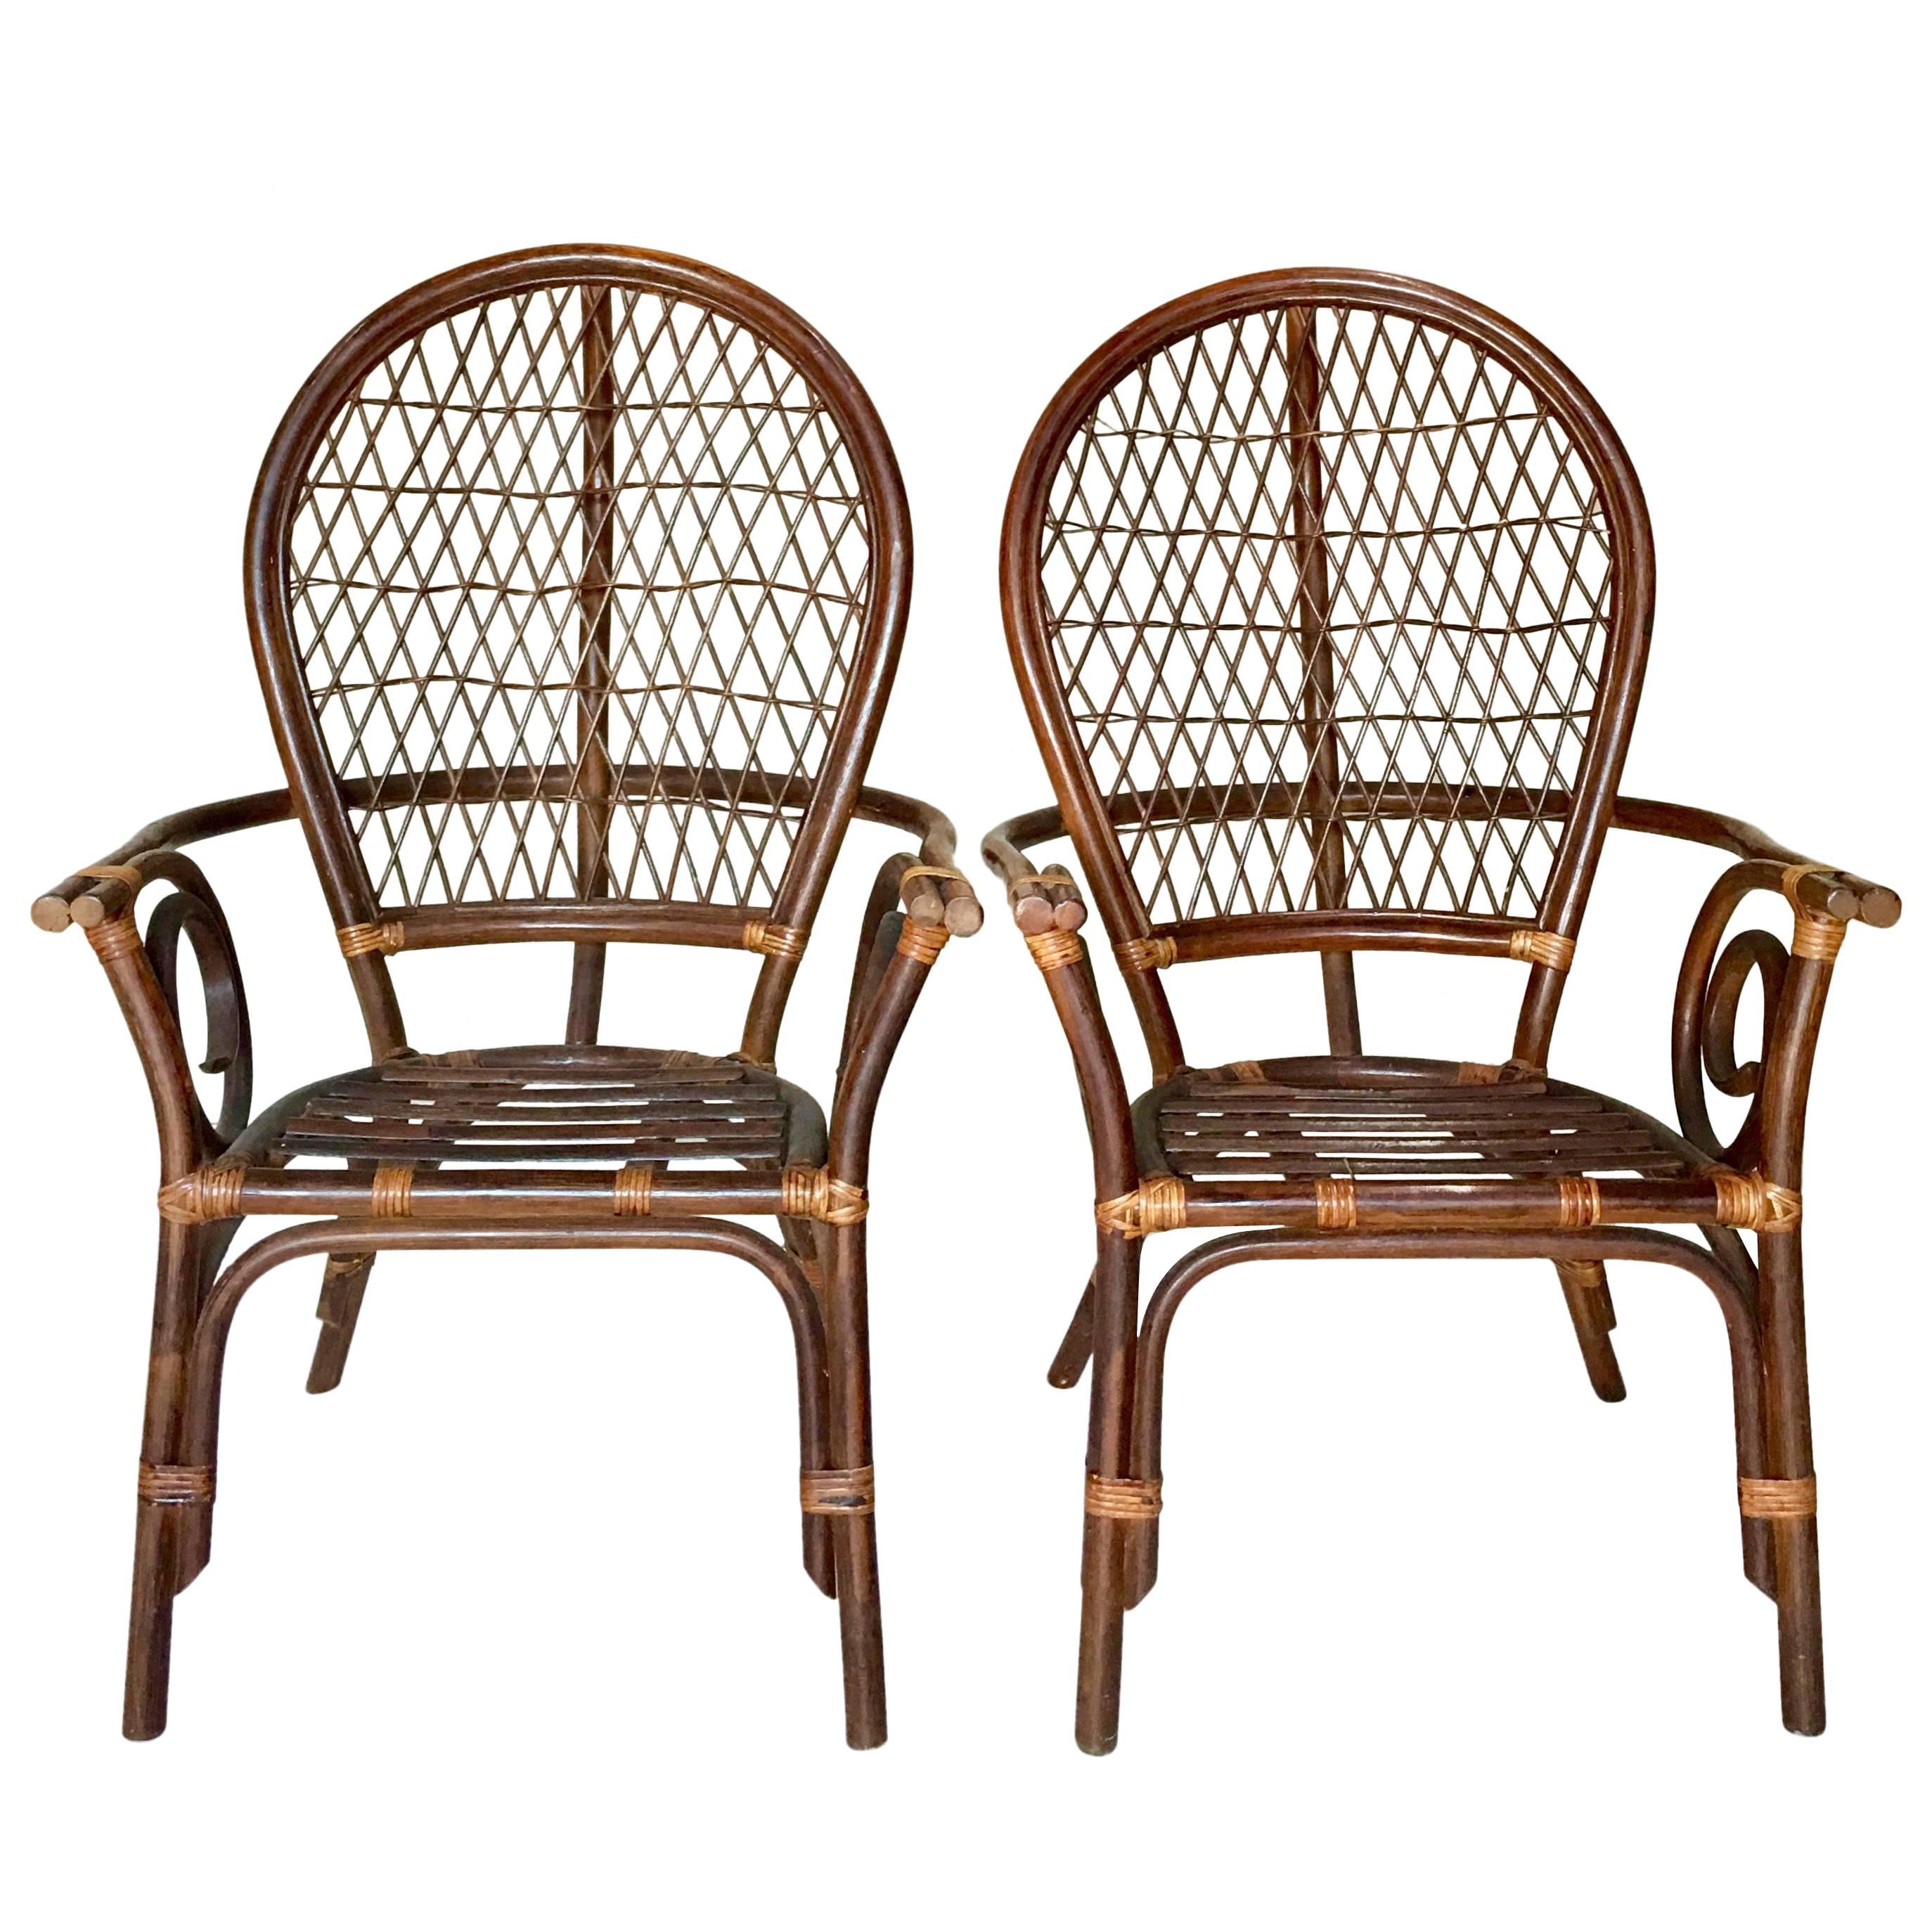 20th Century Pair Of Bent Rattan & Wicker High Back "Balloon" Armchairs For Sale